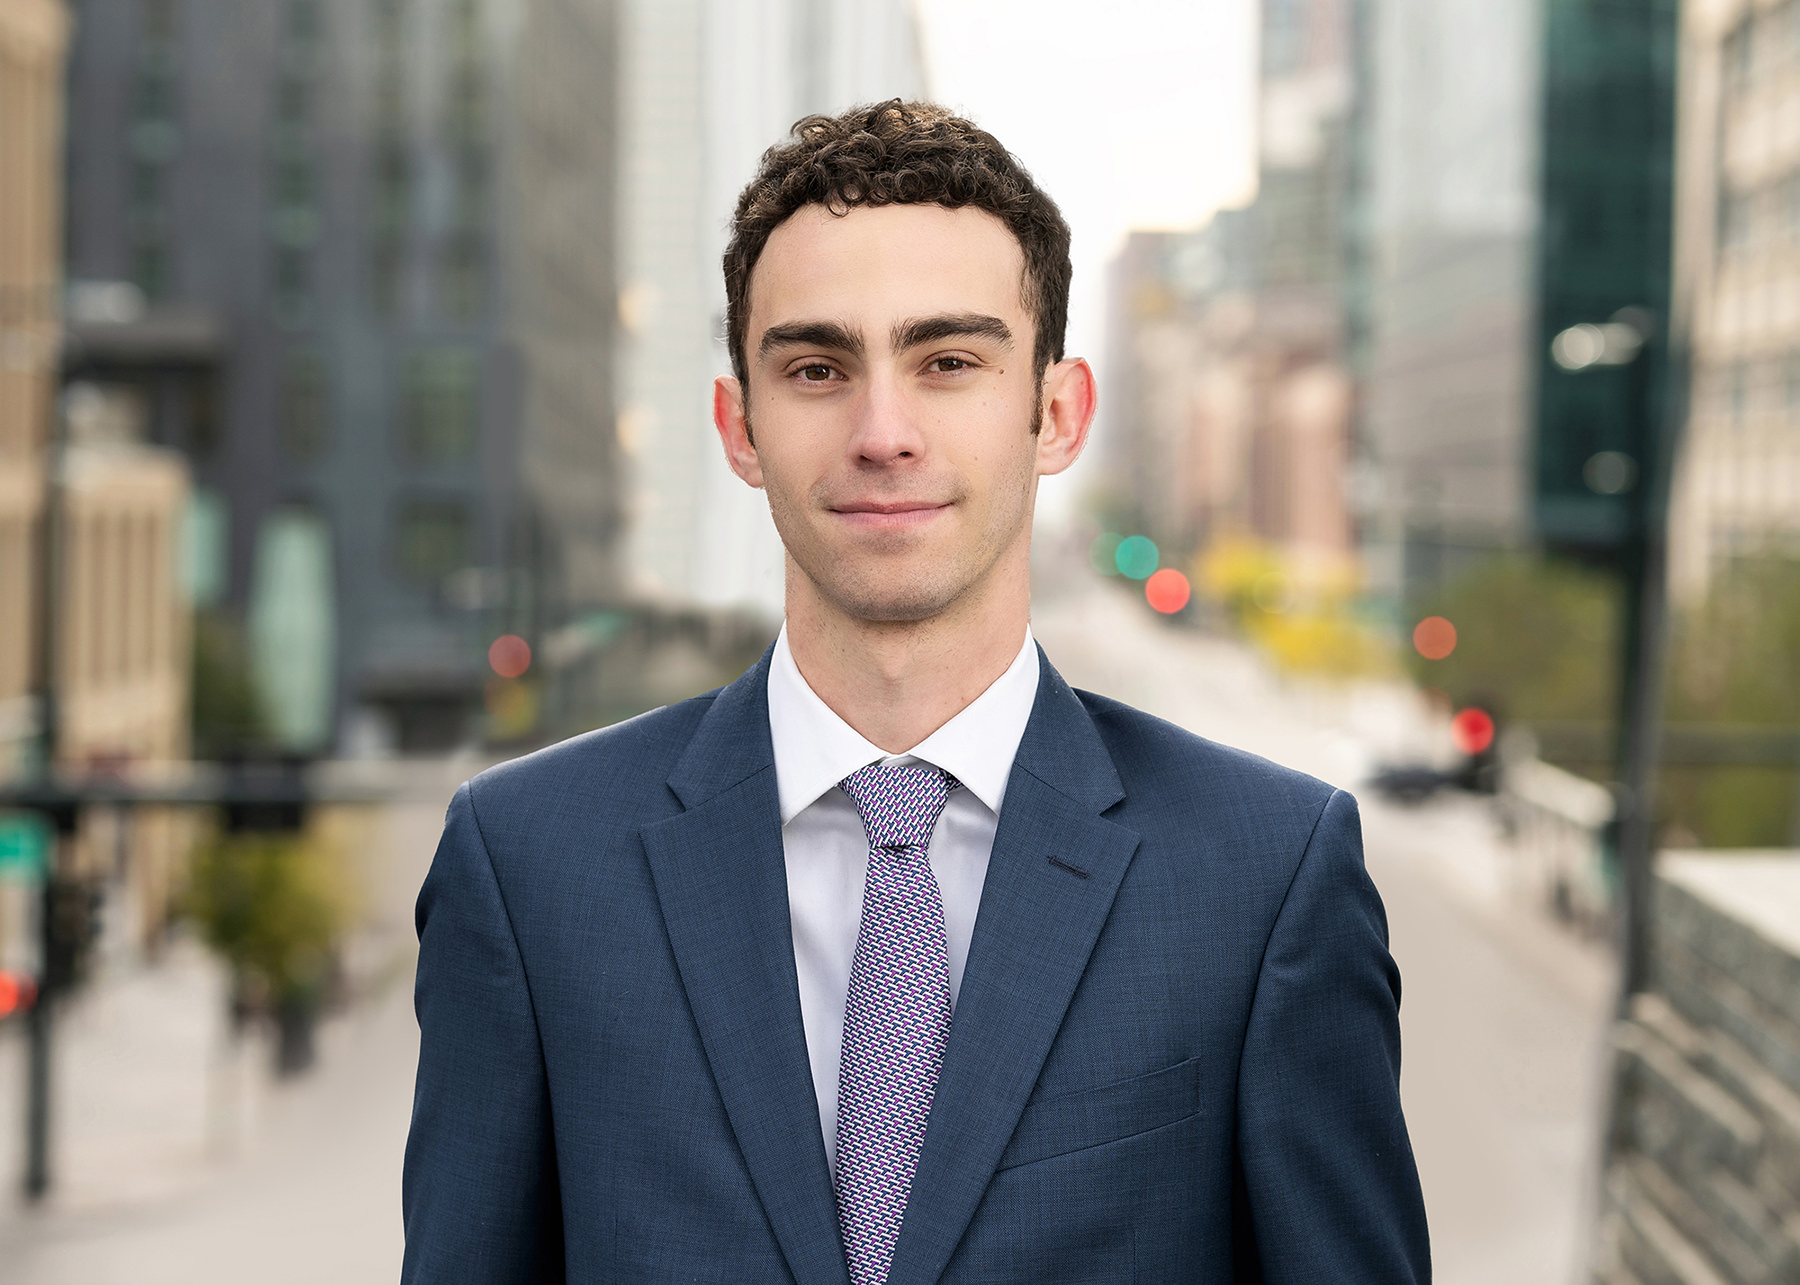 Young man in a business suit standing on an urban Denver street for his headshots.